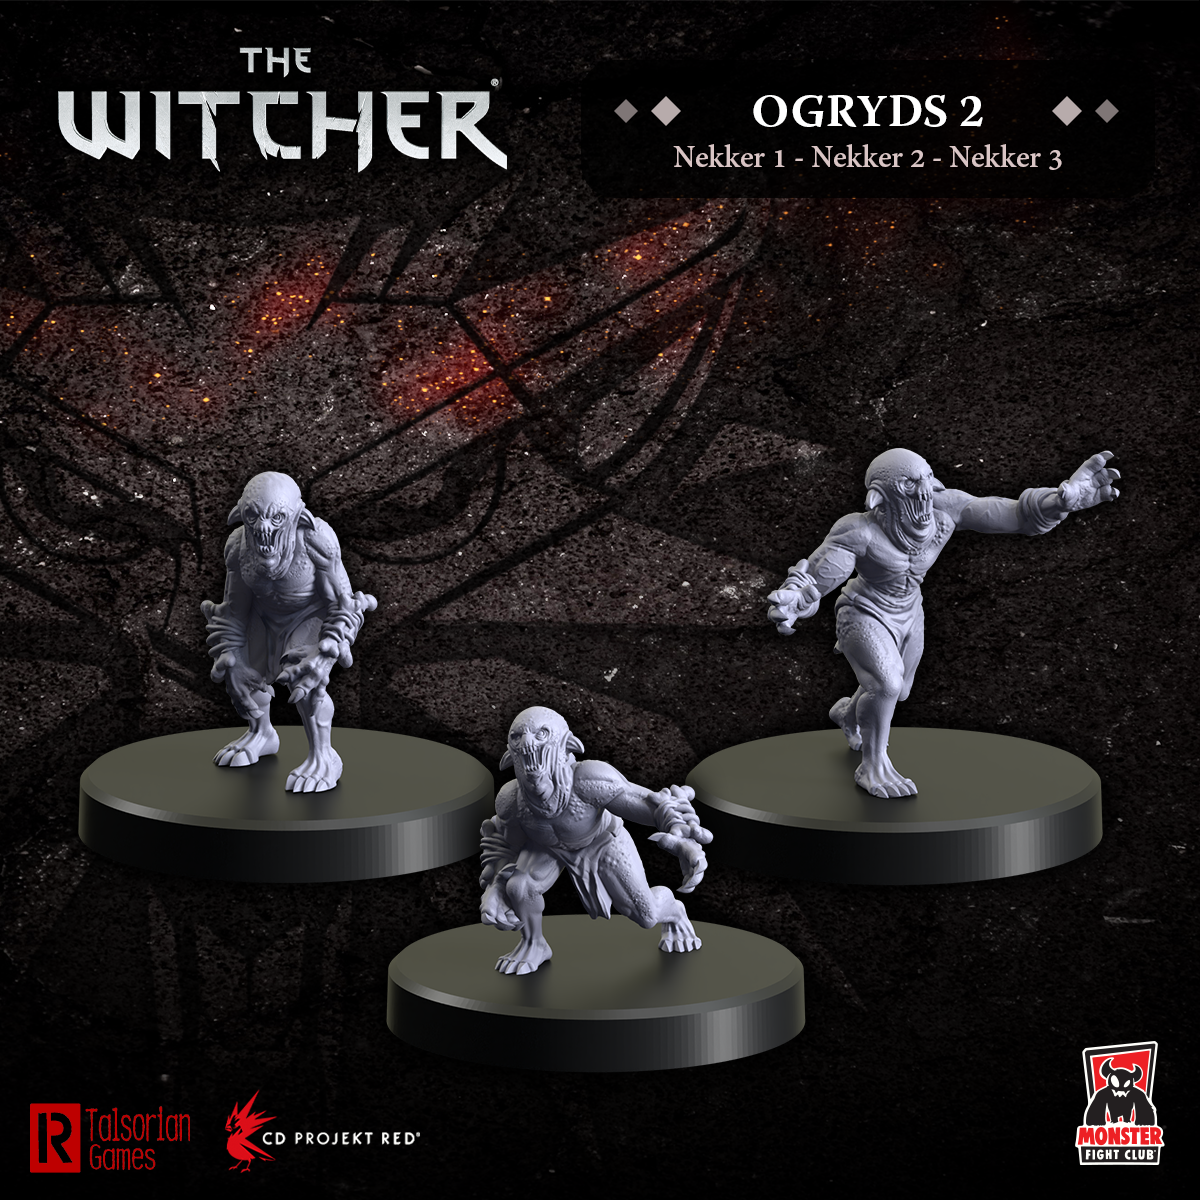 The Witcher - Ogryds 2: Nekkers